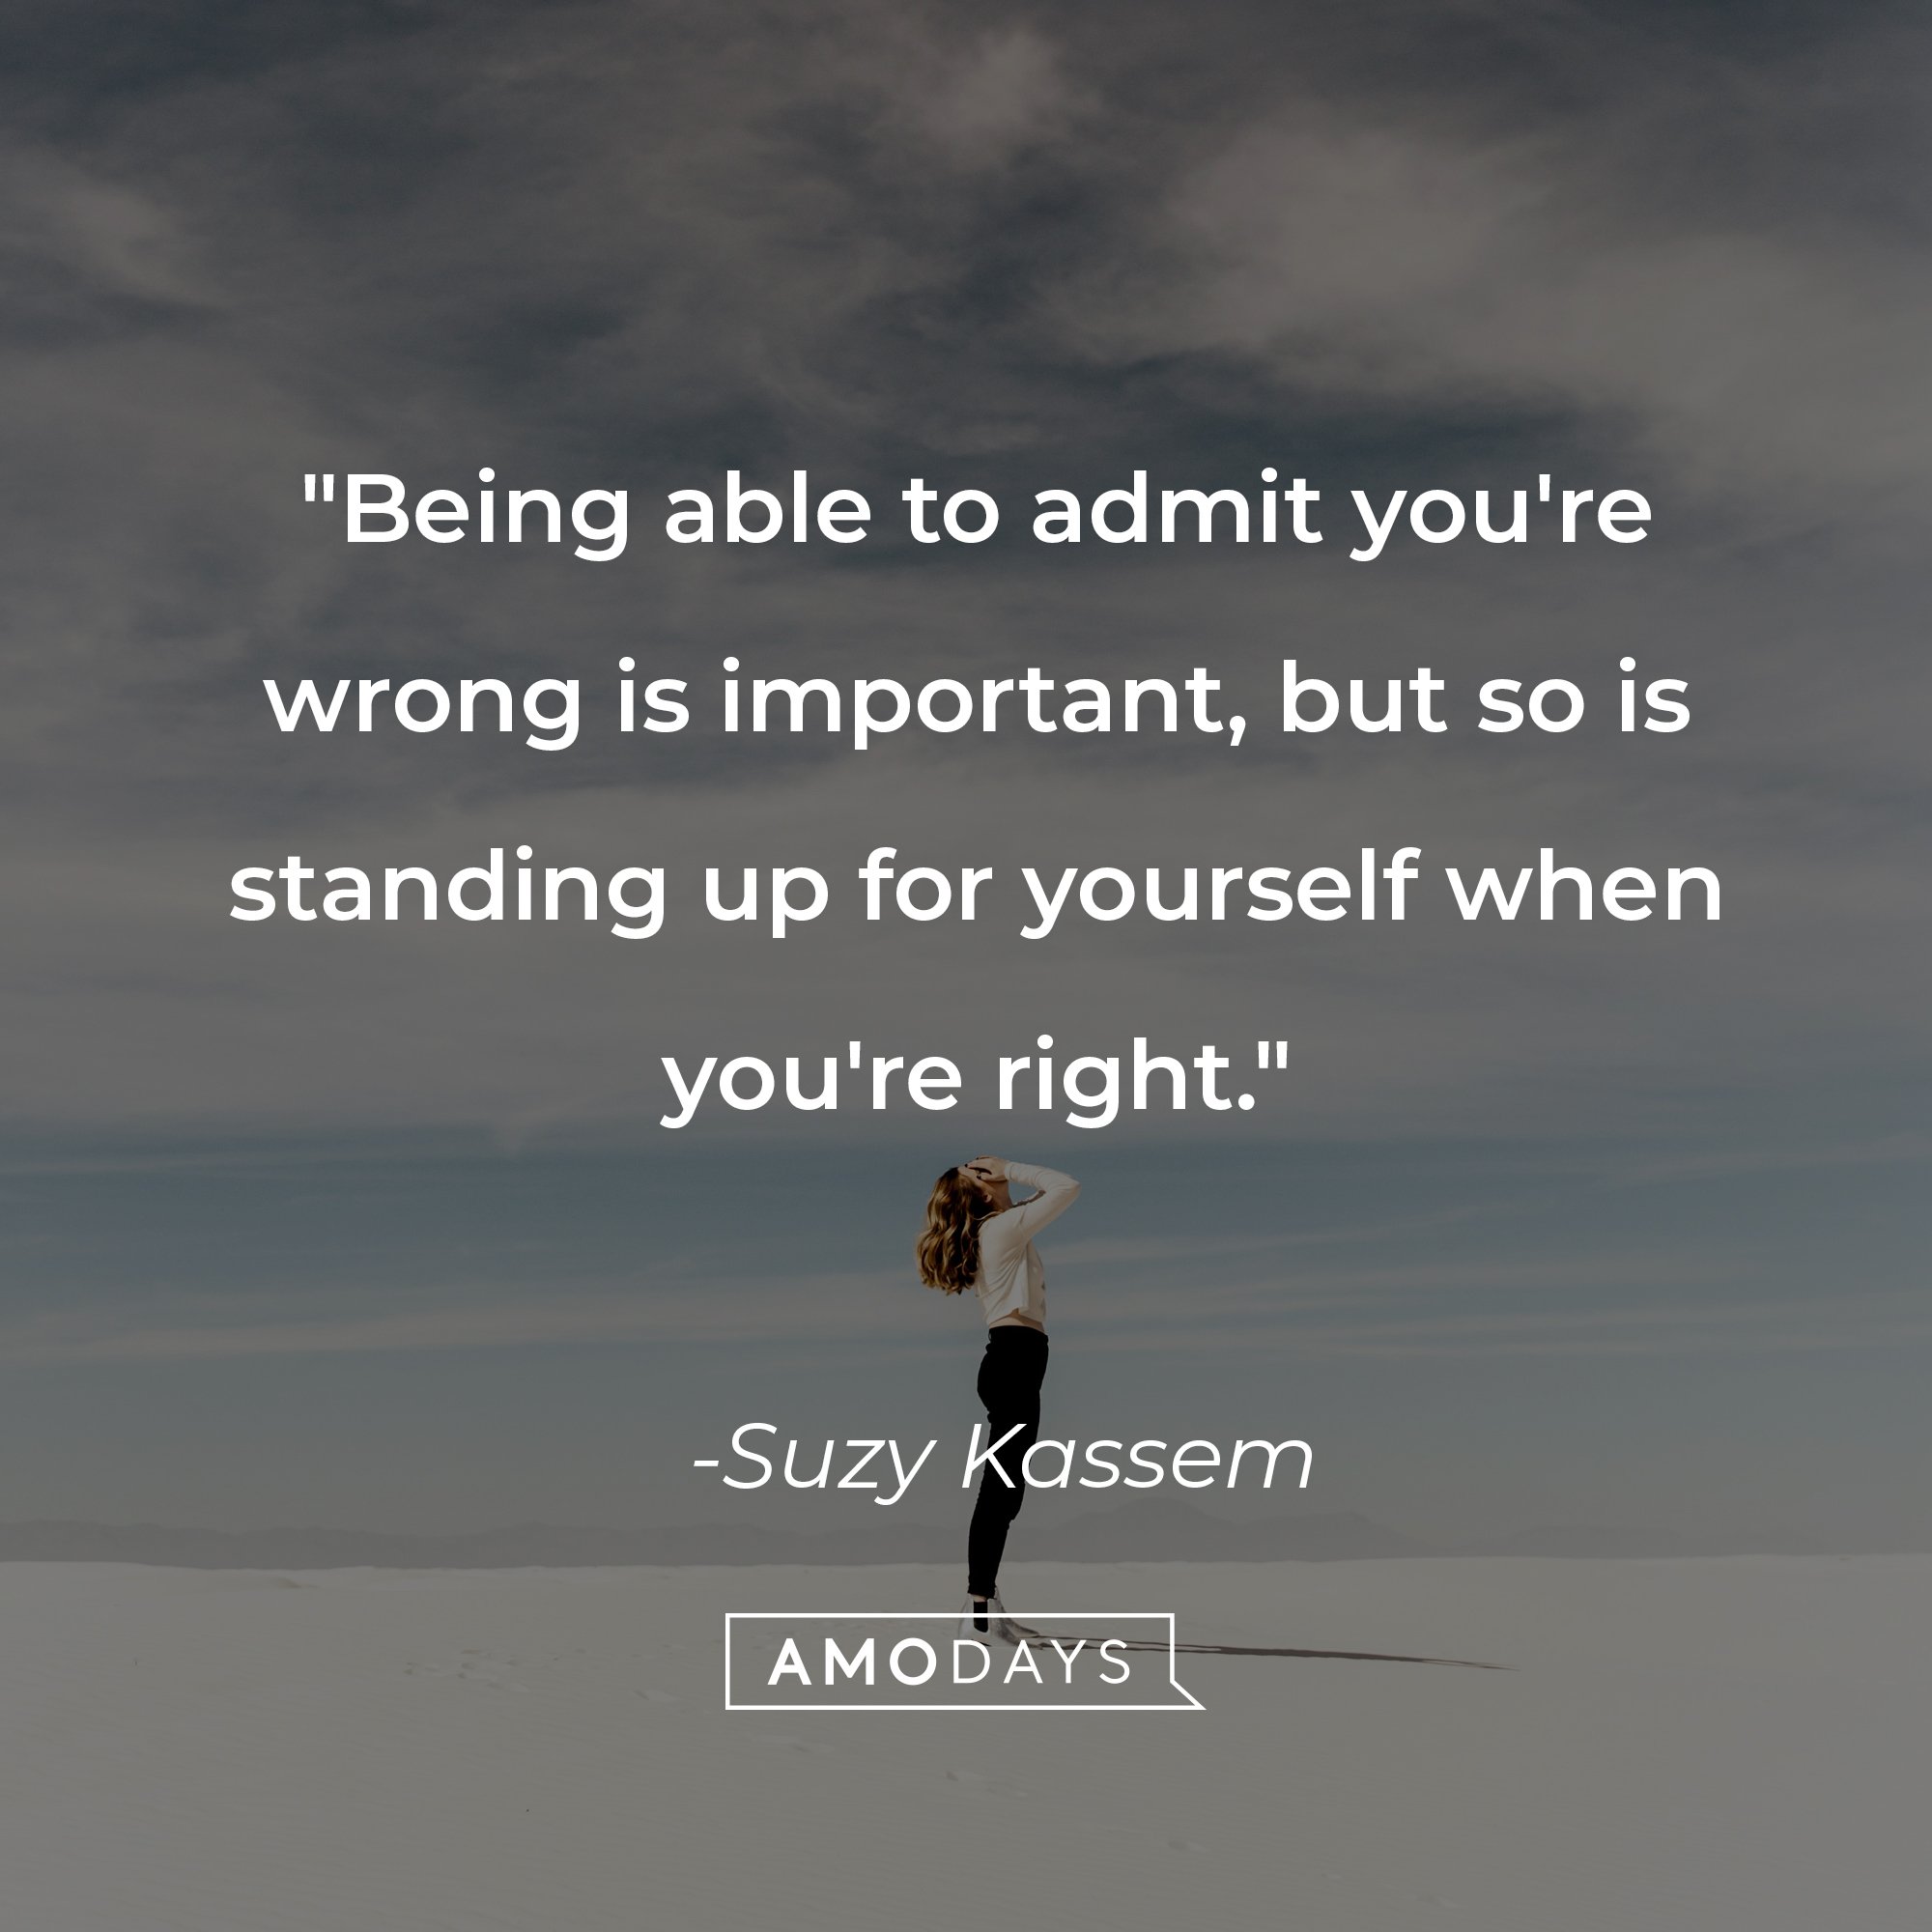 Suzy Kassem's quote: "Being able to admit you're wrong is important, but so is standing up for yourself when you're right." | Image: AmoDays